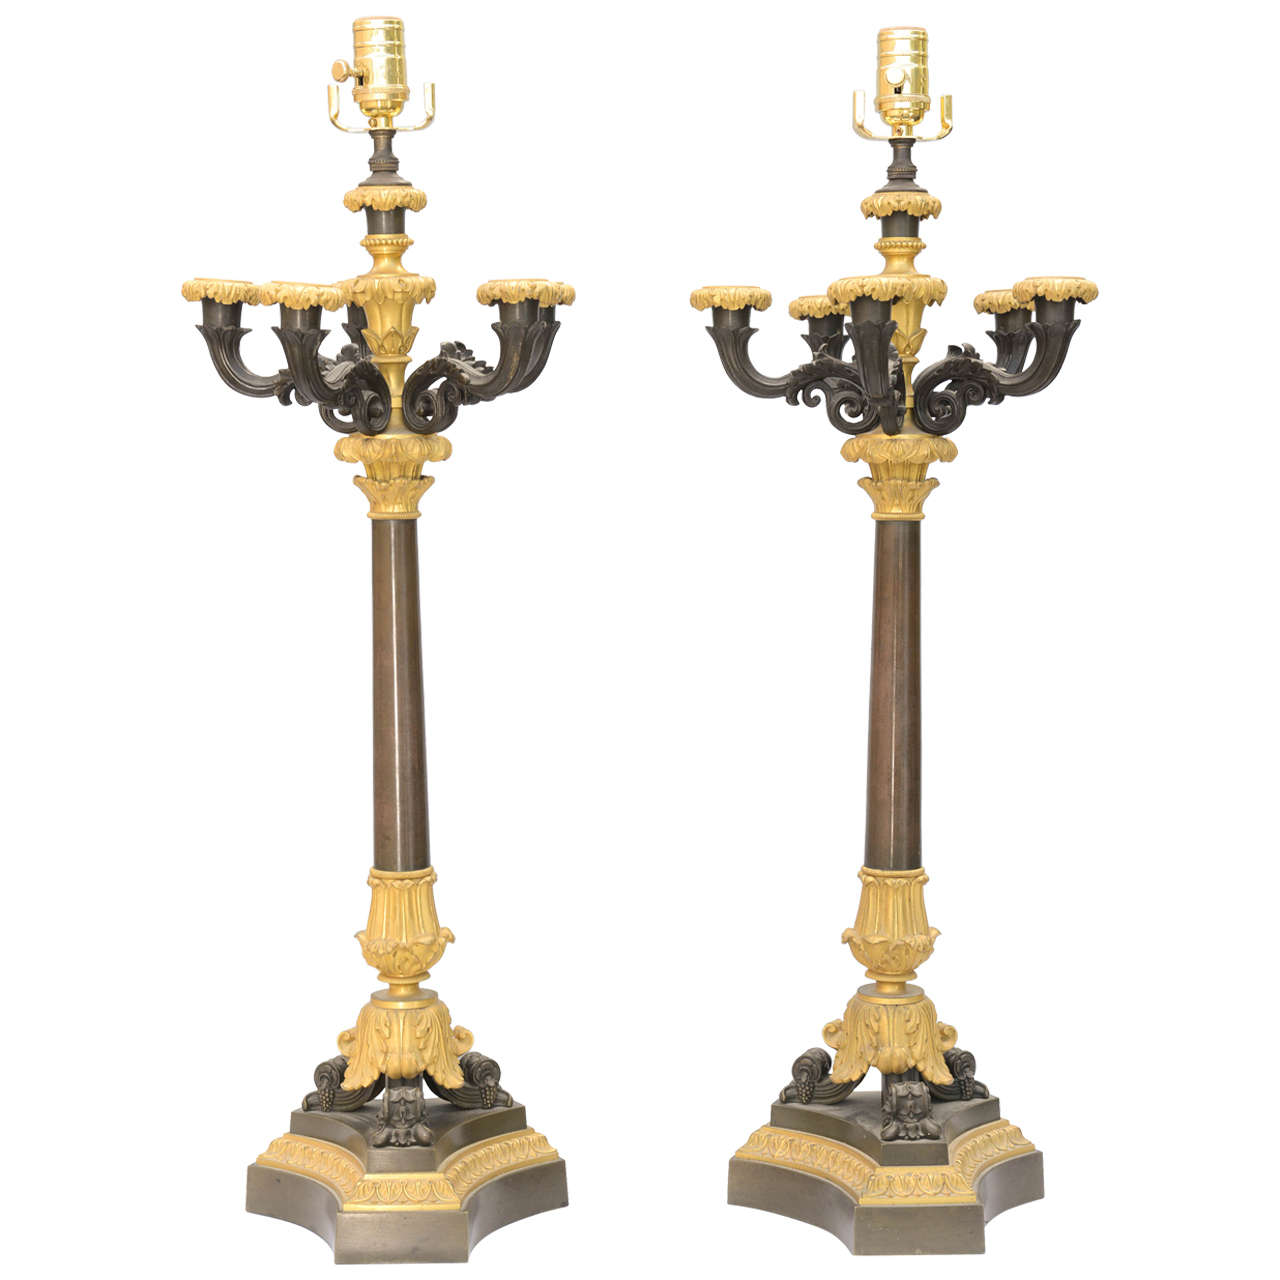 Pair of 19th Century French Bronze Candelabra Lamps